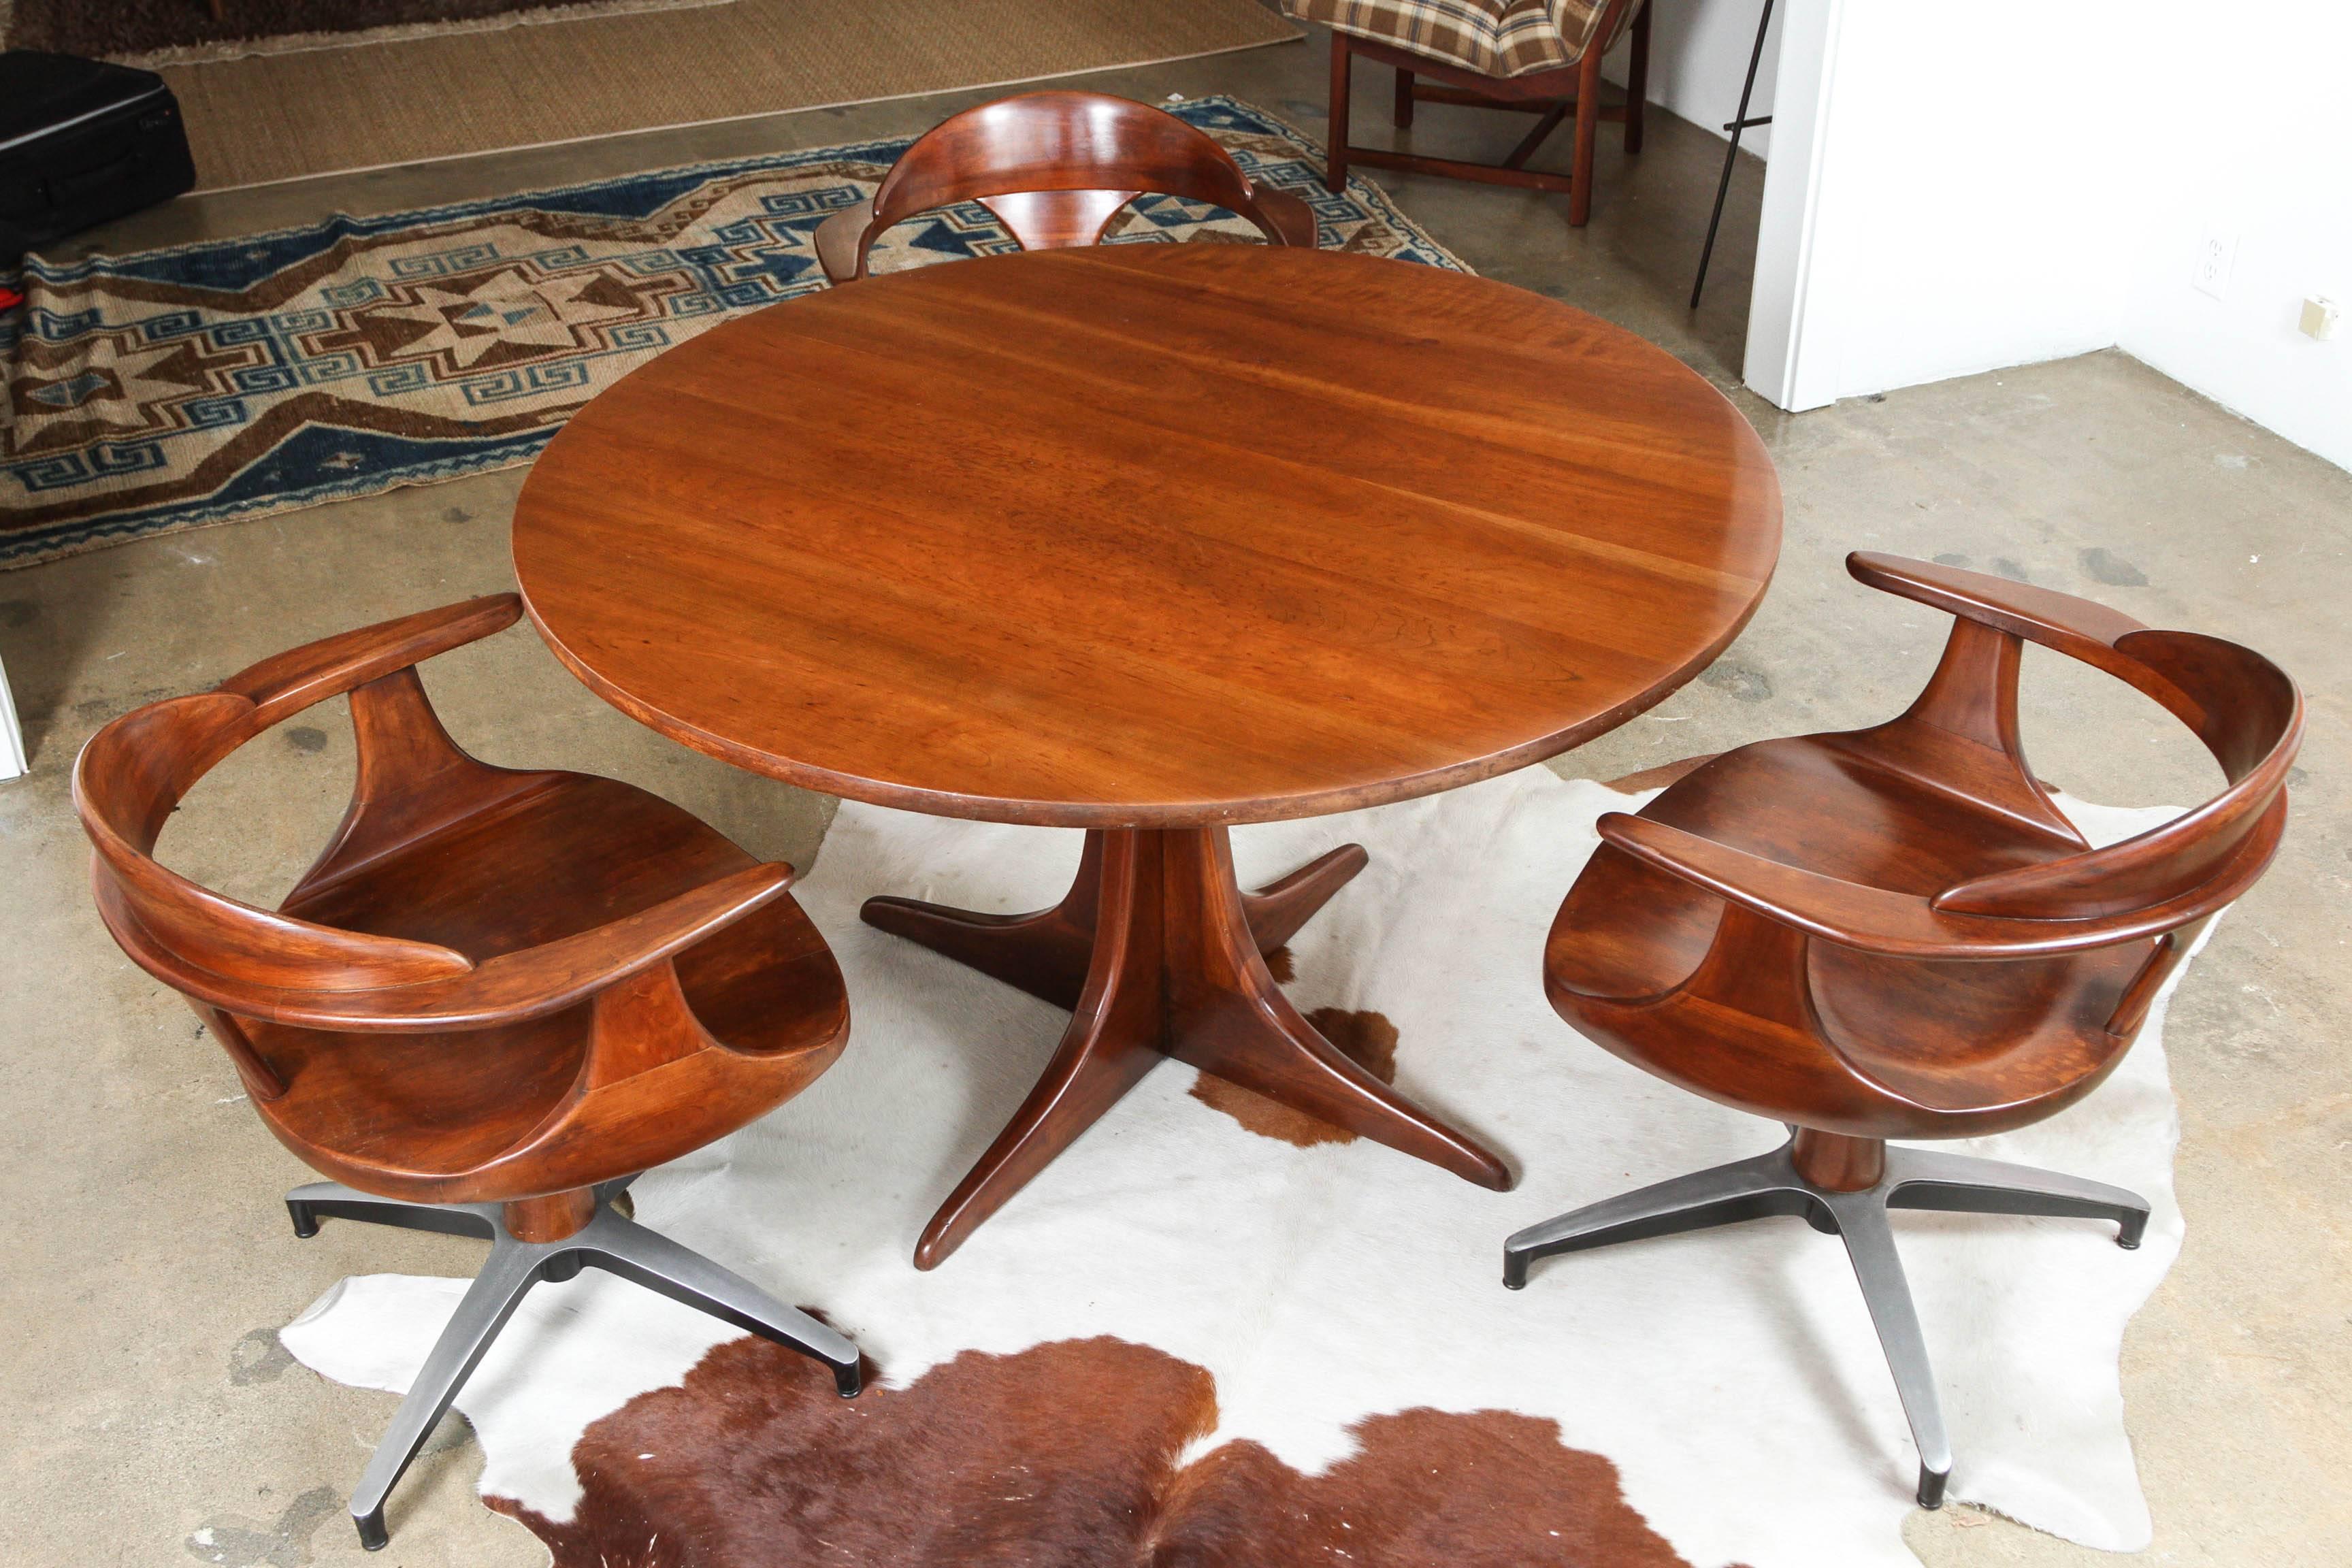 A rare Heywood Wakefield Cliff House mahogany table set - four swivel armchairs with metal base; beautiful joinery and details.


